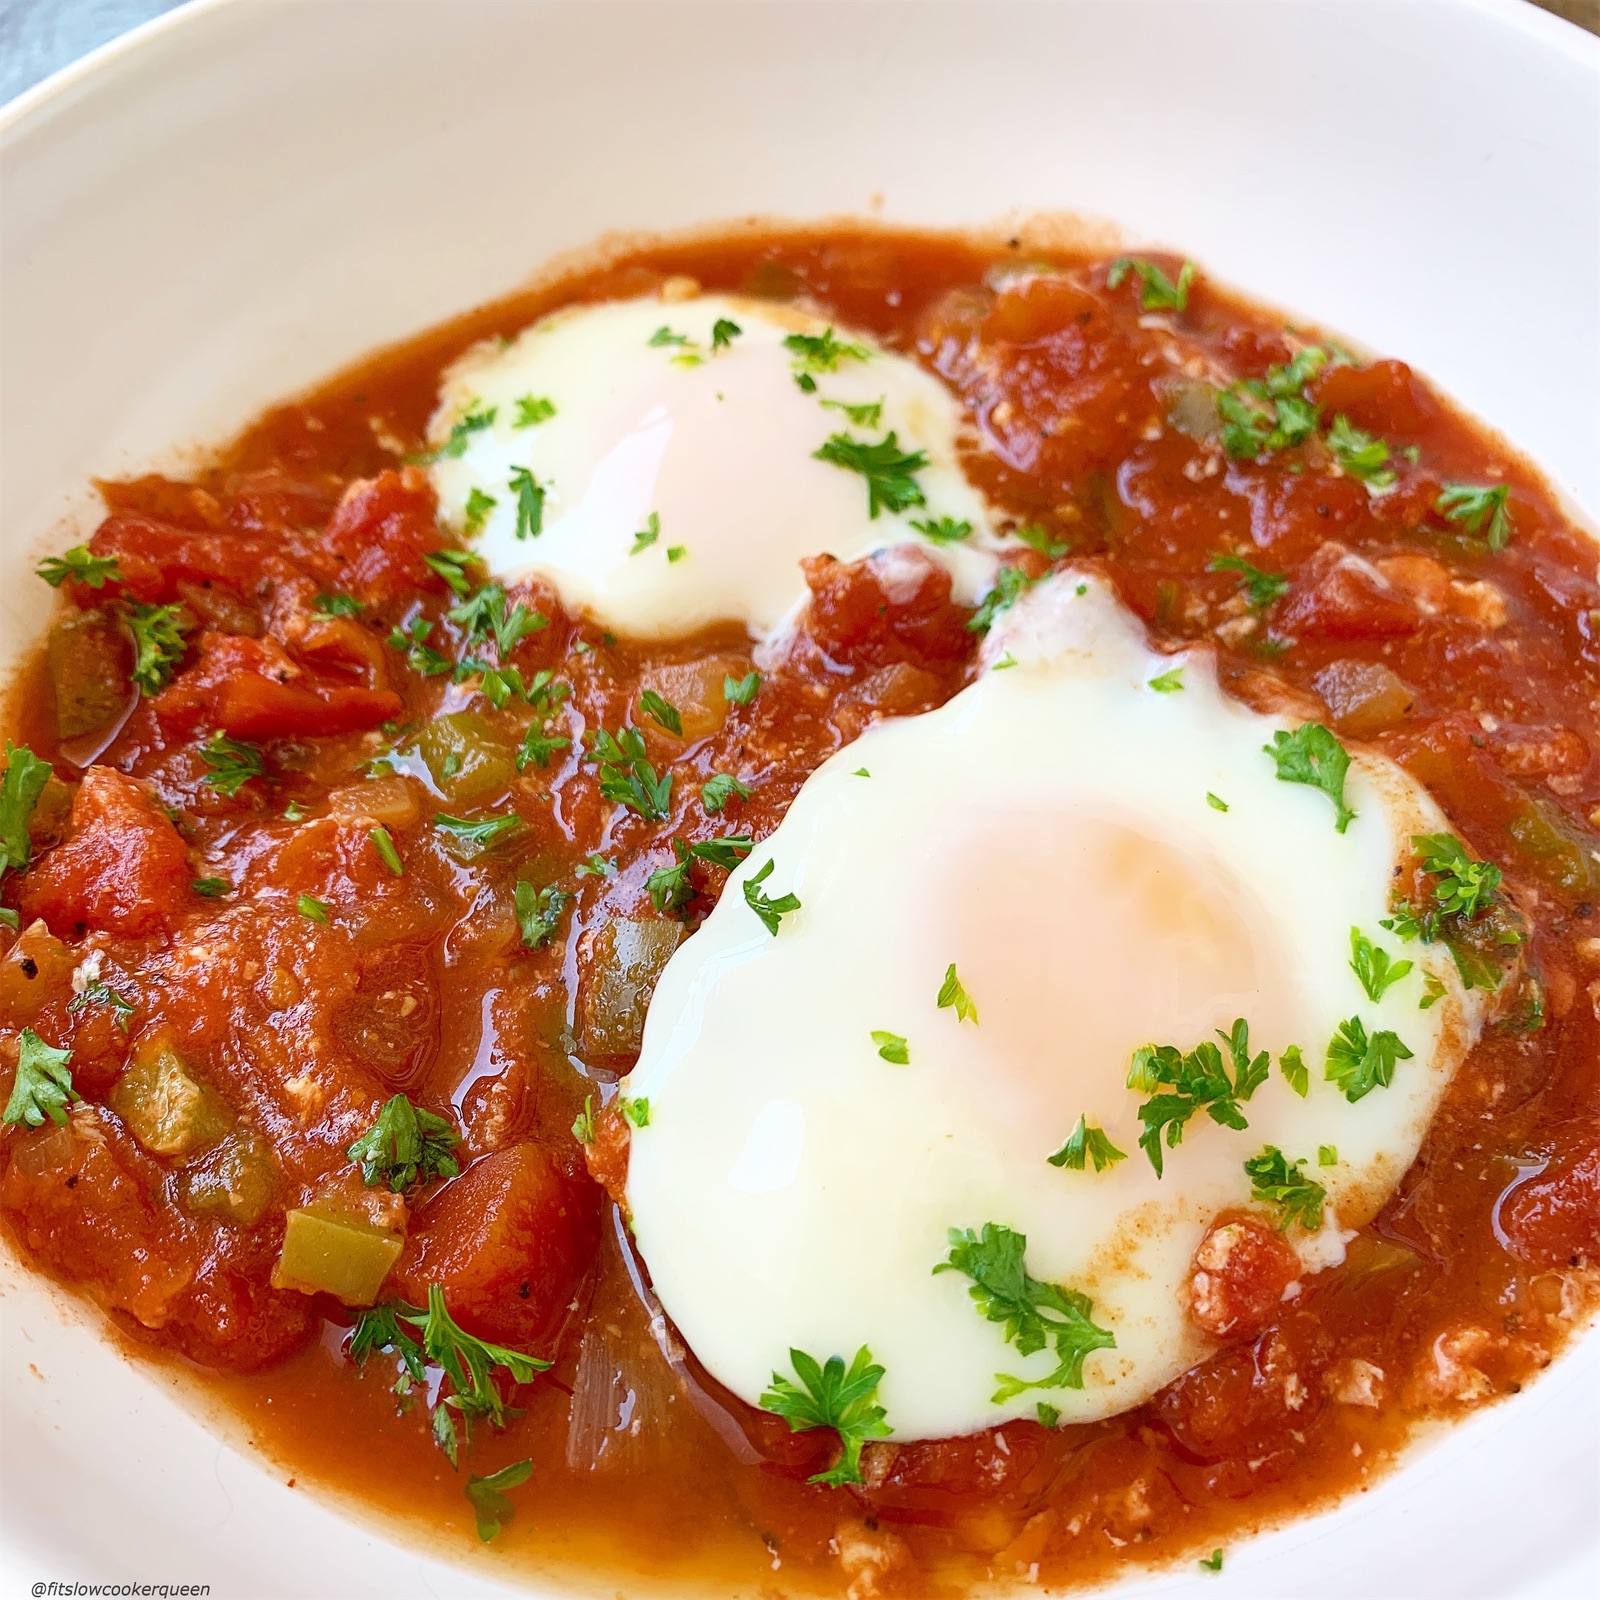 Shakshuka is simple yet flavorful Middle Eastern dish made with tomatoes, eggs, and spices. Make this recipe in your slow cooker or Instant Pot.